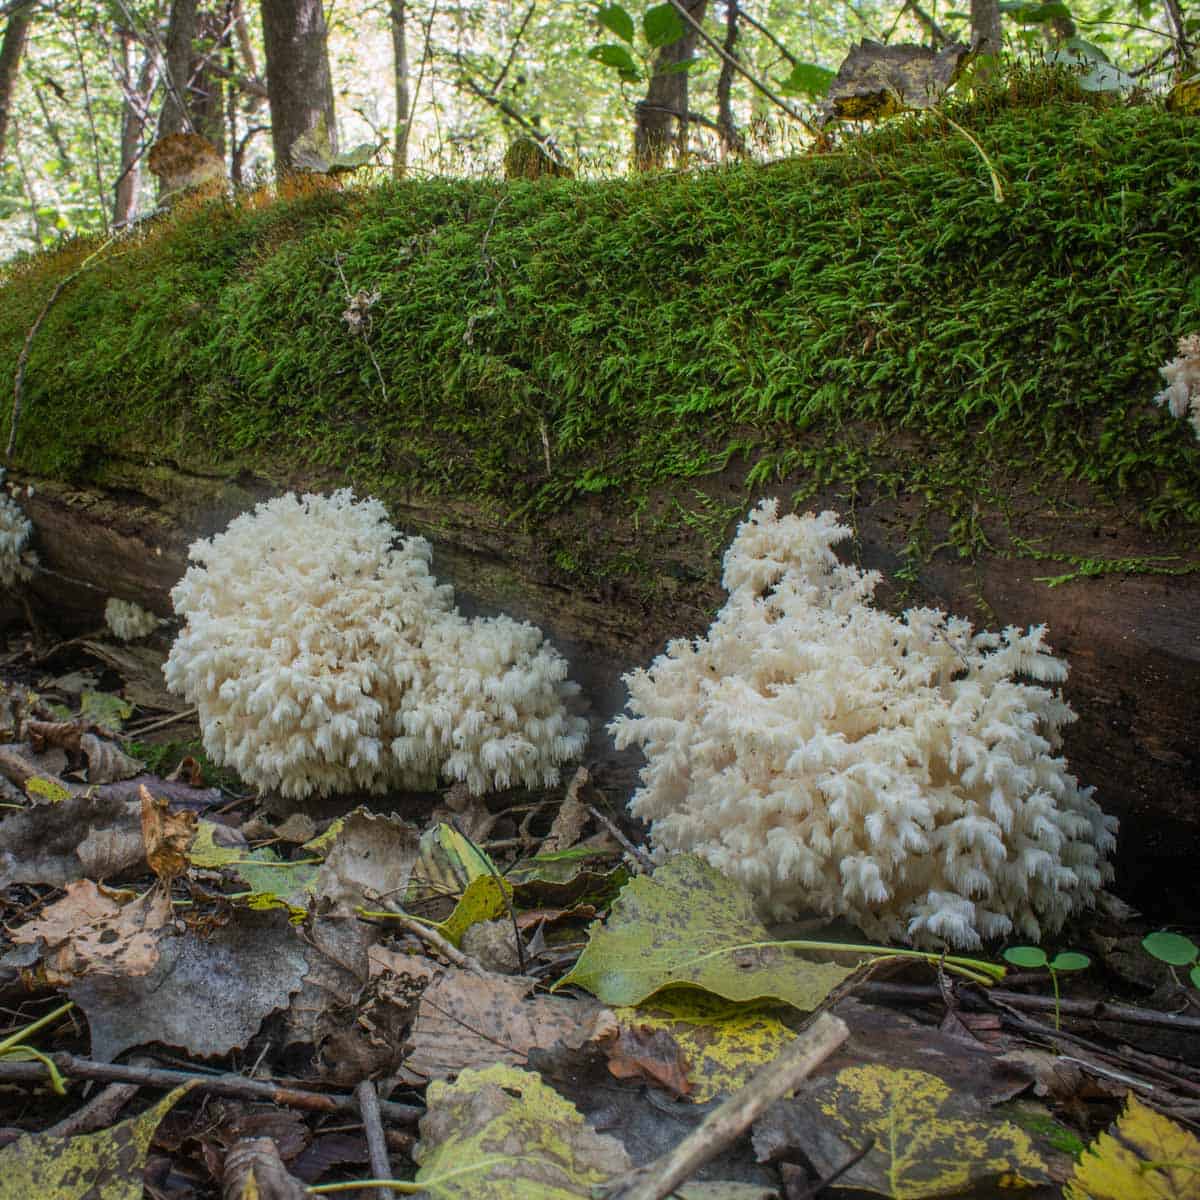 Hericium coralloides mushrooms on a log 